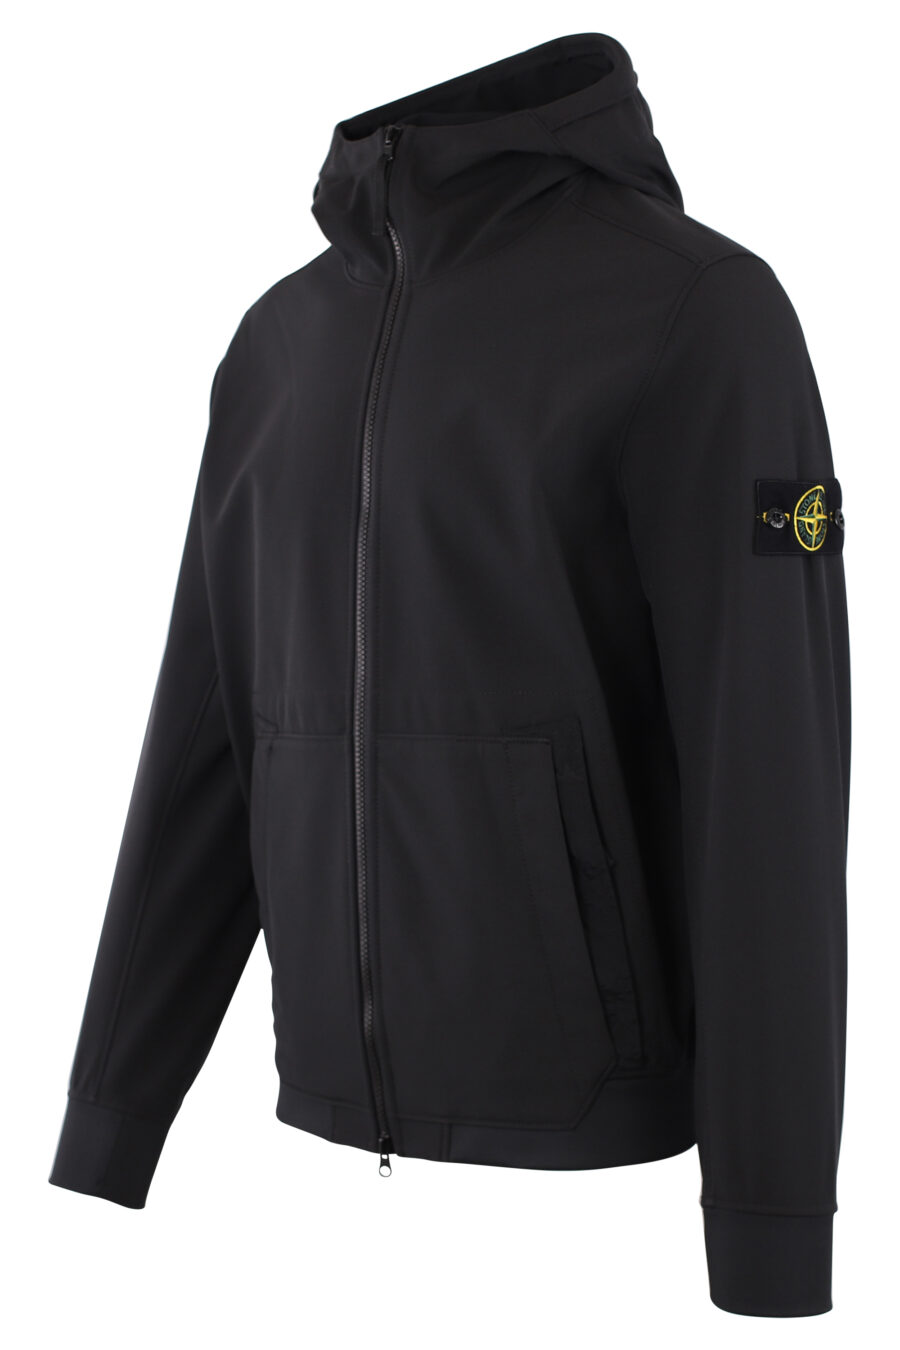 Black jacket with hood and logo patch - IMG 1505